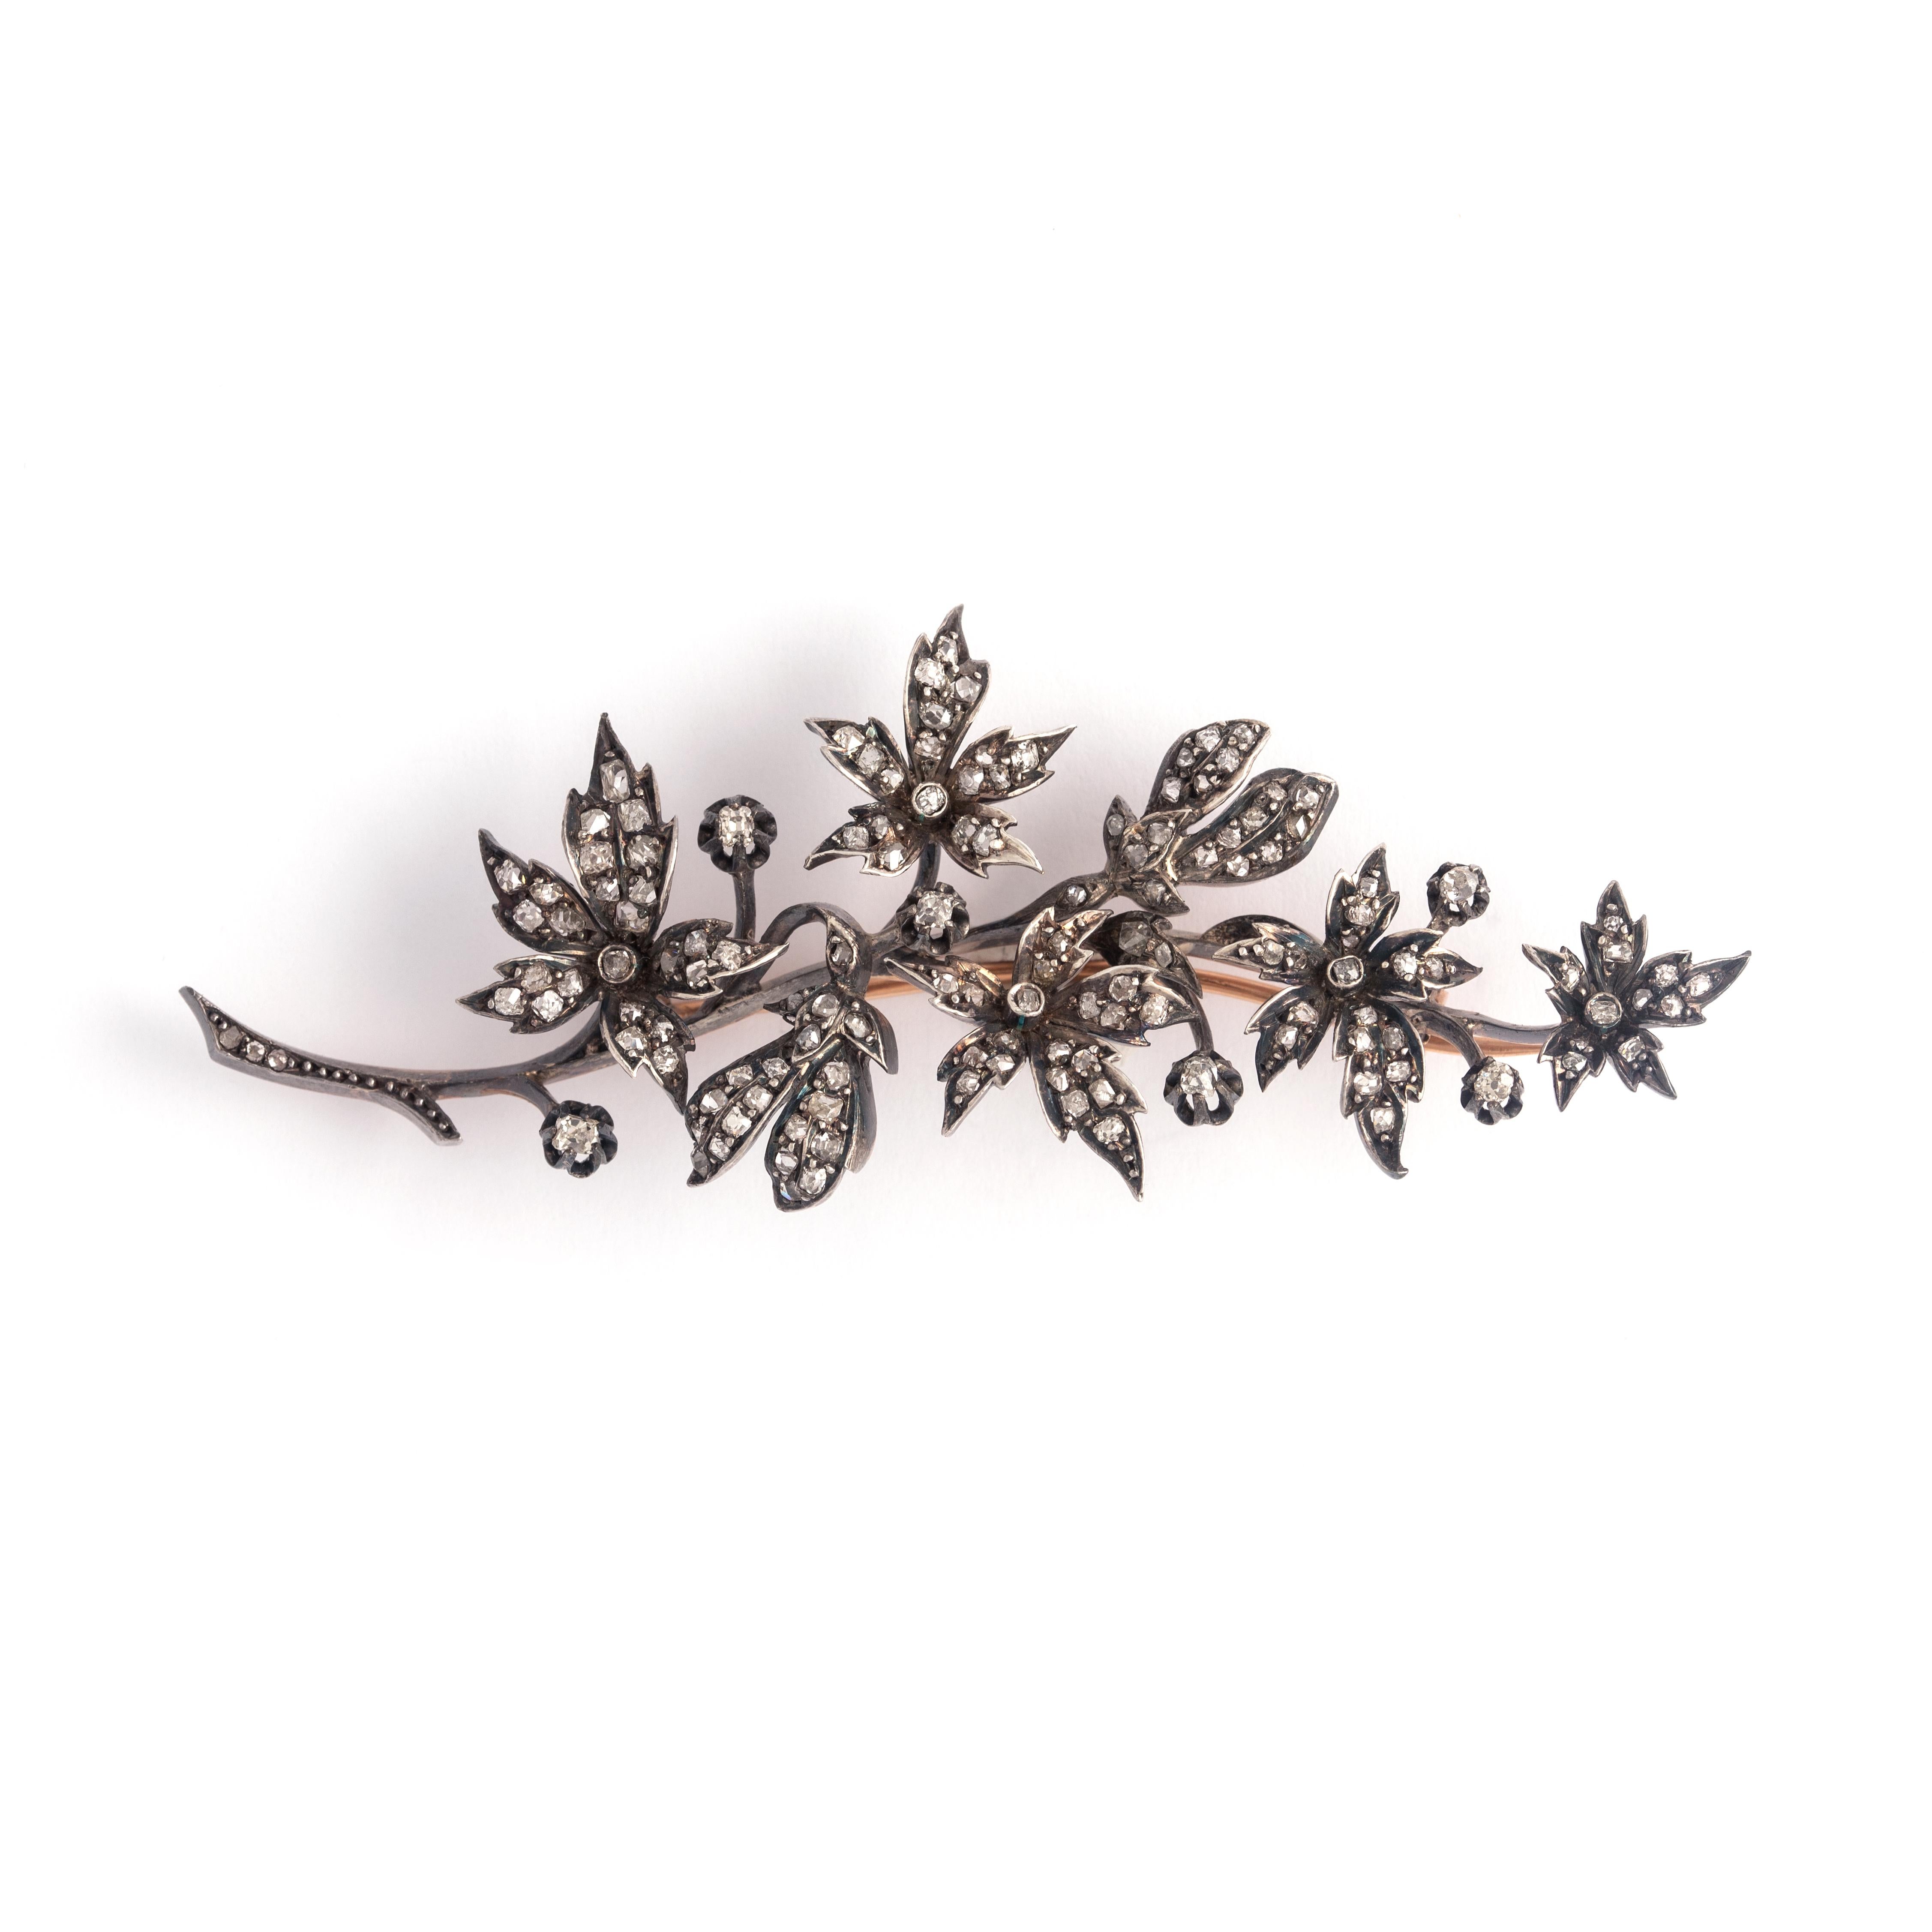 Mellerio Borgnis French Antique Diamond Silver Gold Flower Brooch 19th Century For Sale 2